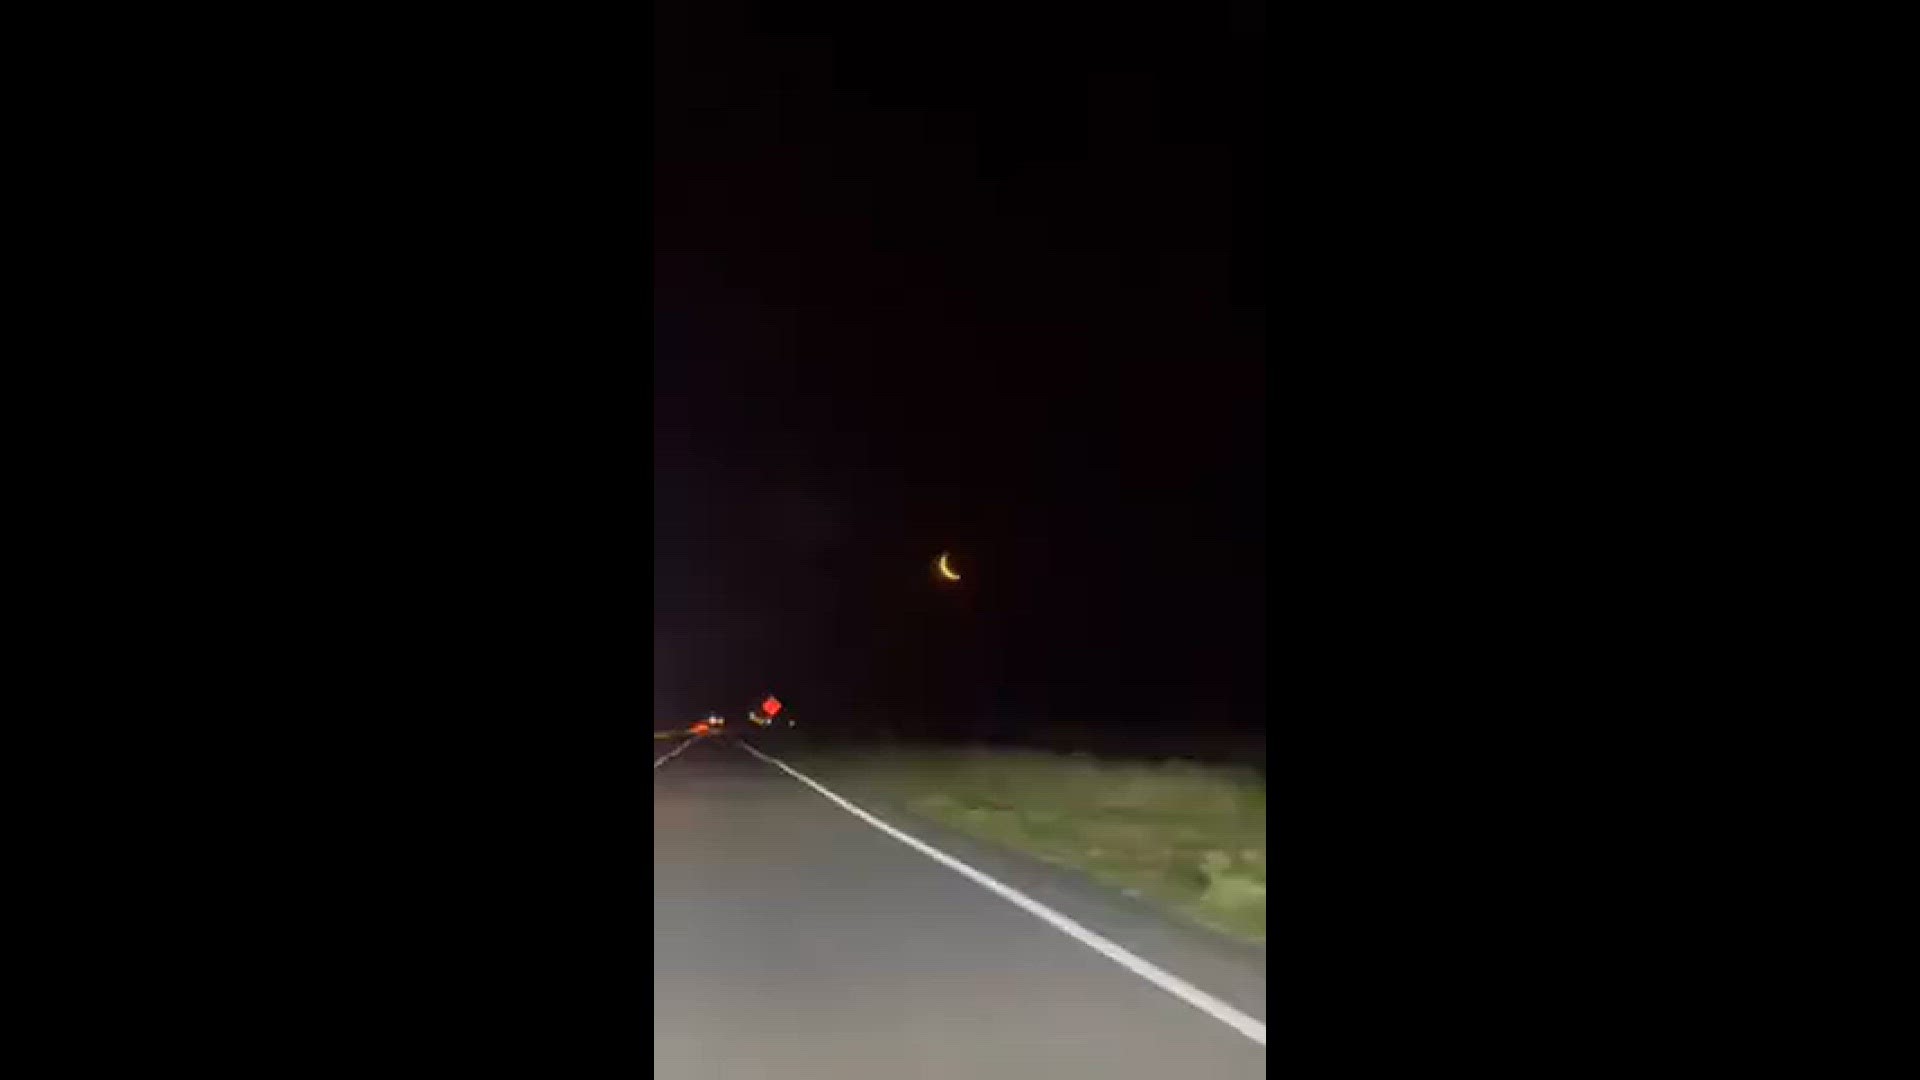 Video of the Moon while driving on Highway 17 in Brunswick Friday morning
Credit: Matt